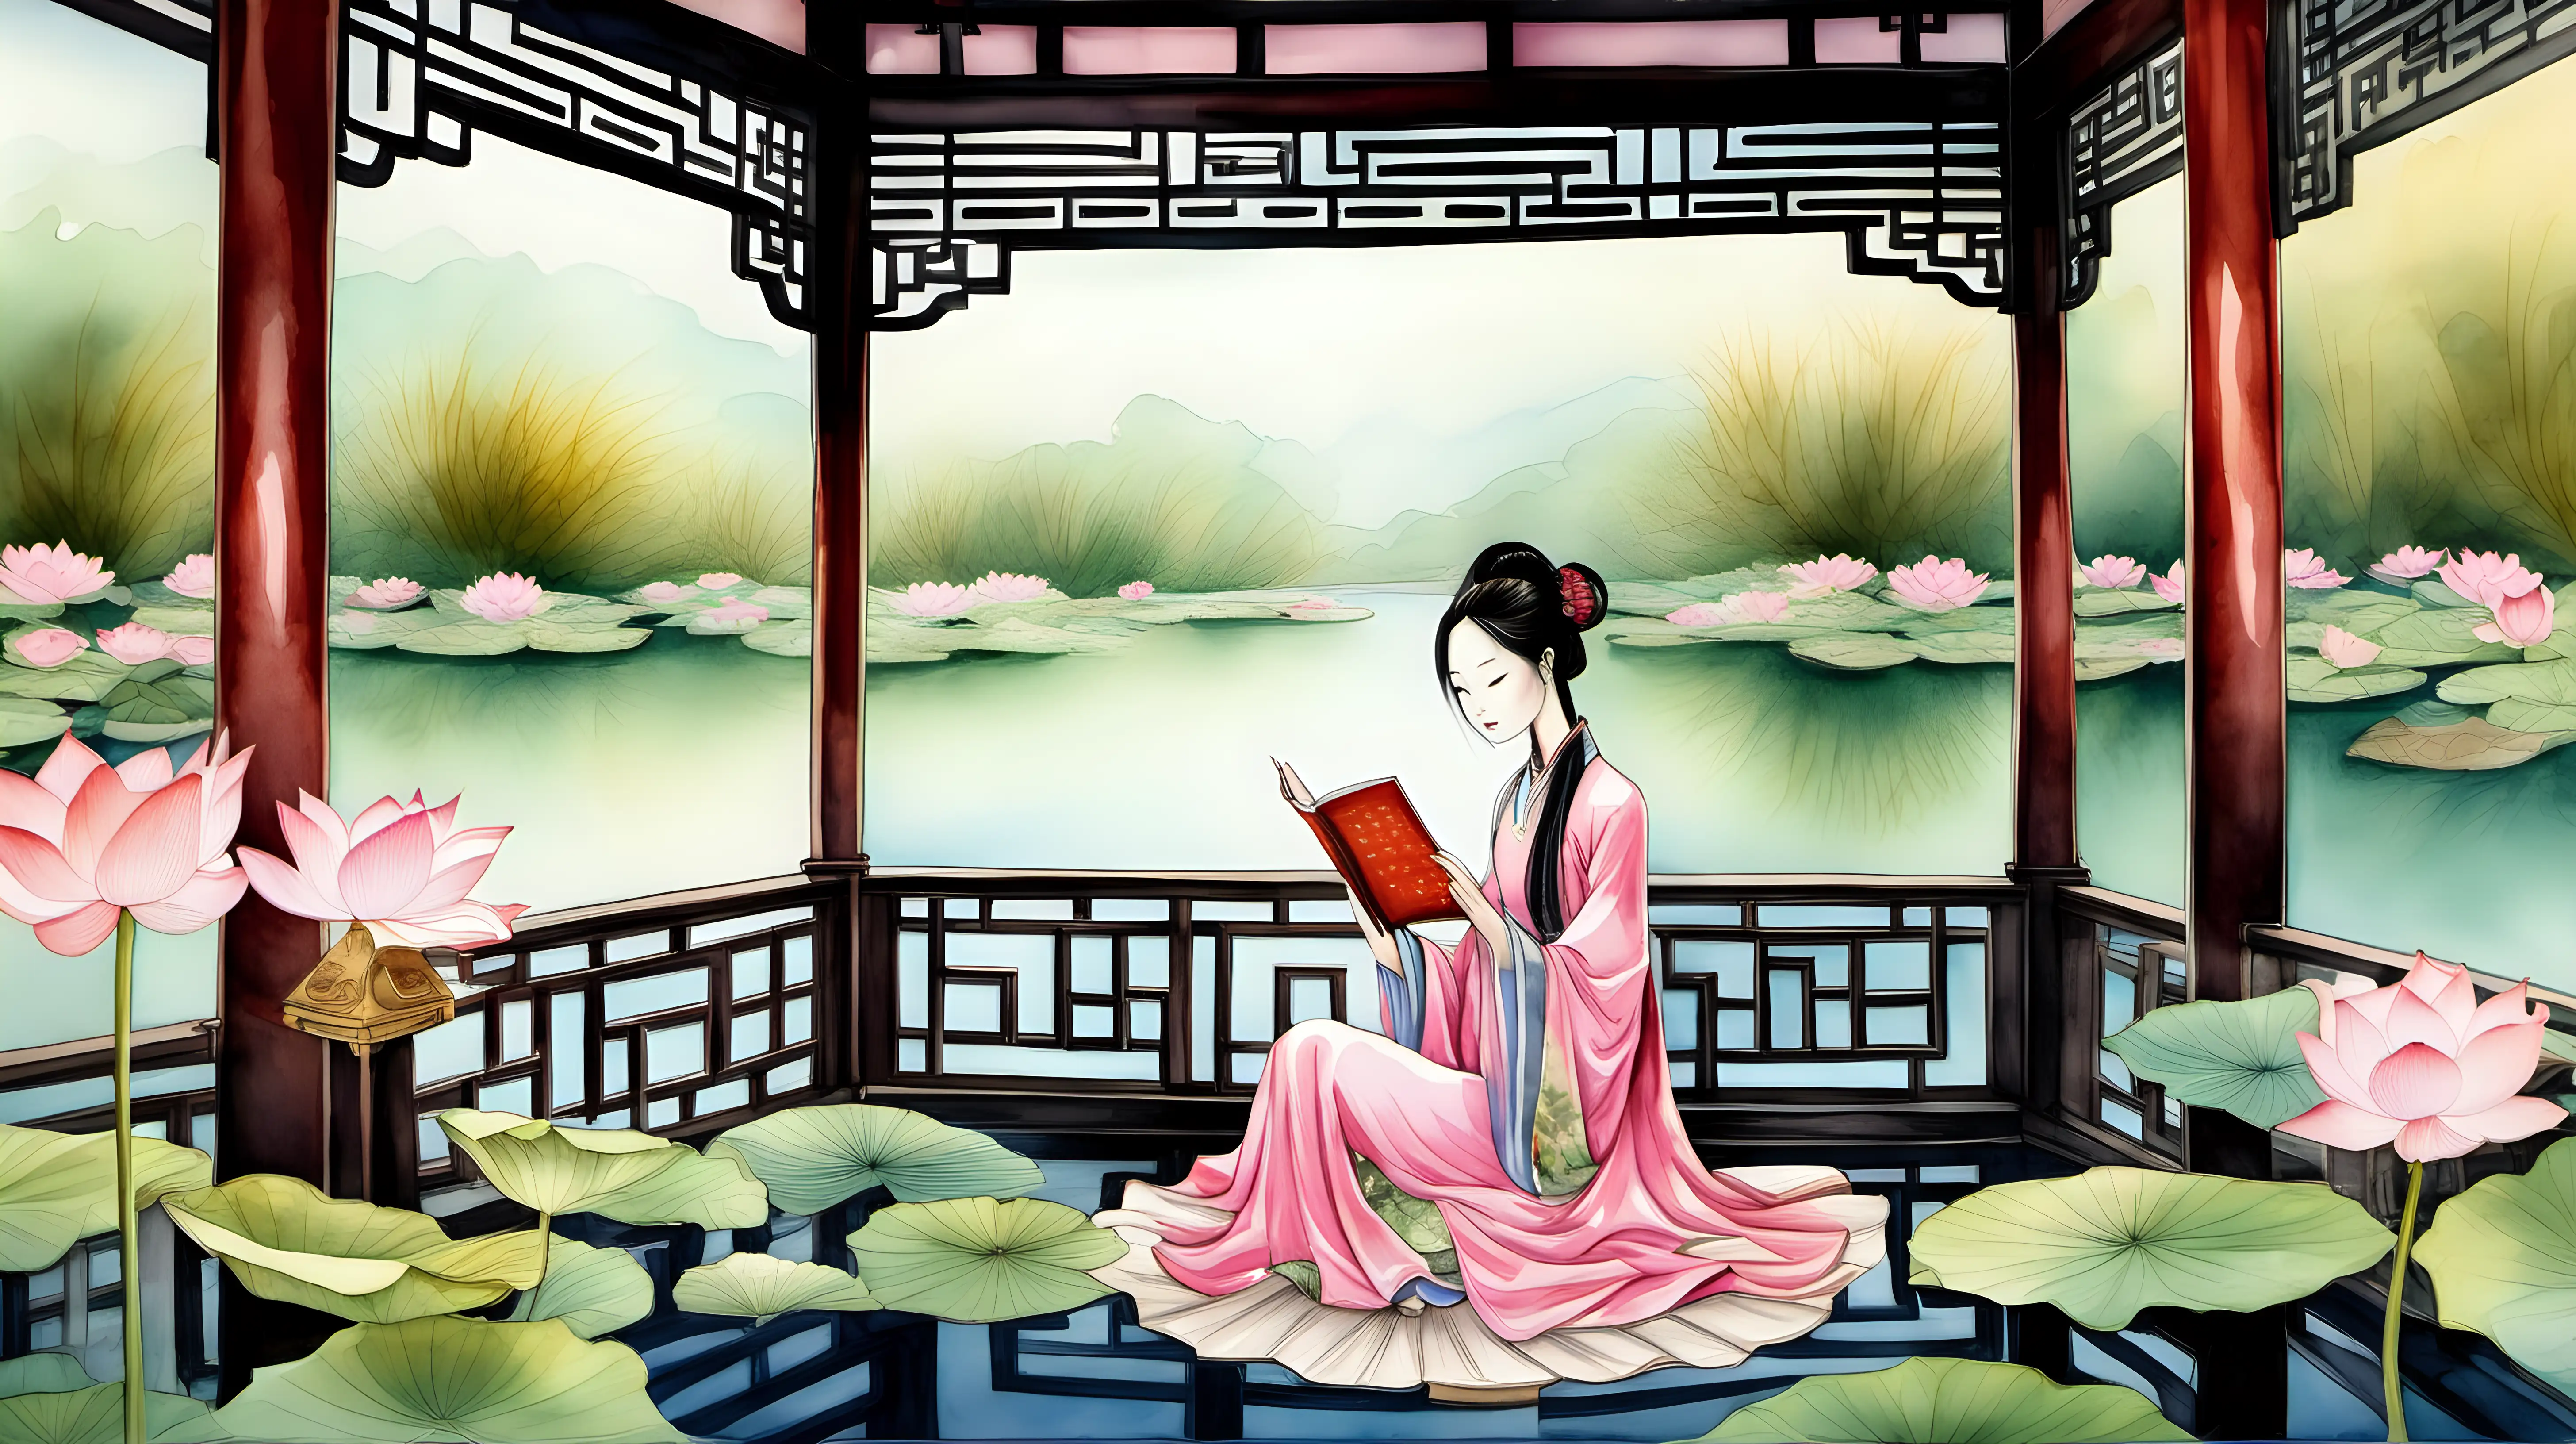 a watercolor painting of a serene chinese princess reading a book surrounded by lotus flower in a beautiful gazebo by the lake, textured painting